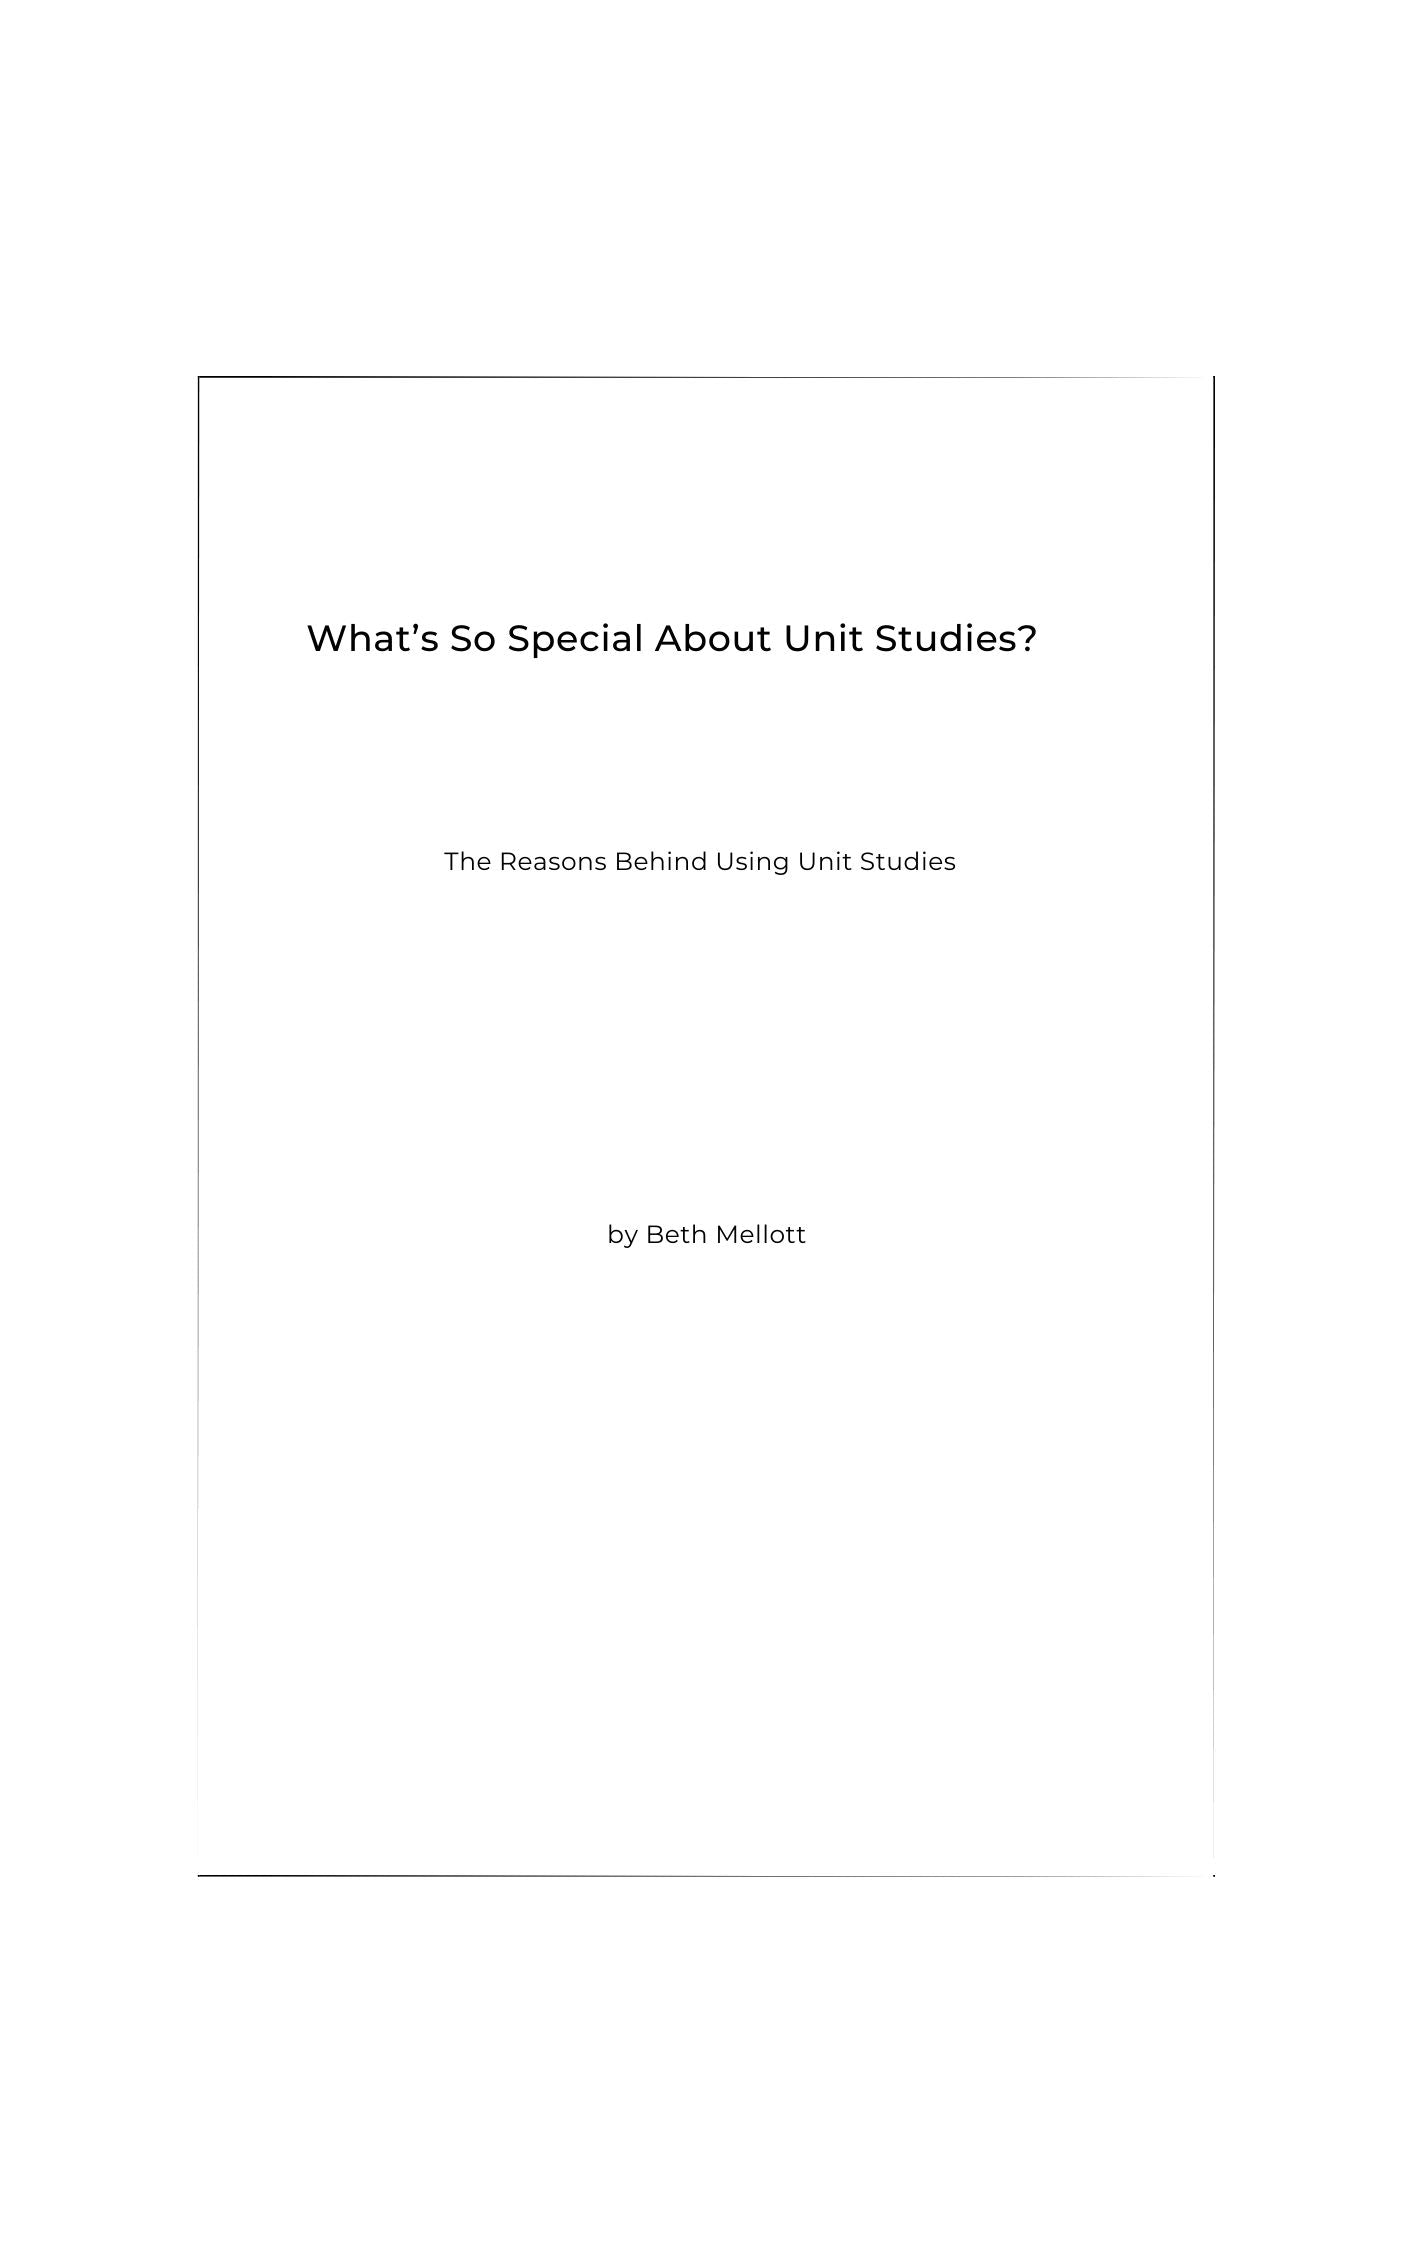 FREEBIE - What's So Special About Unit Studies?